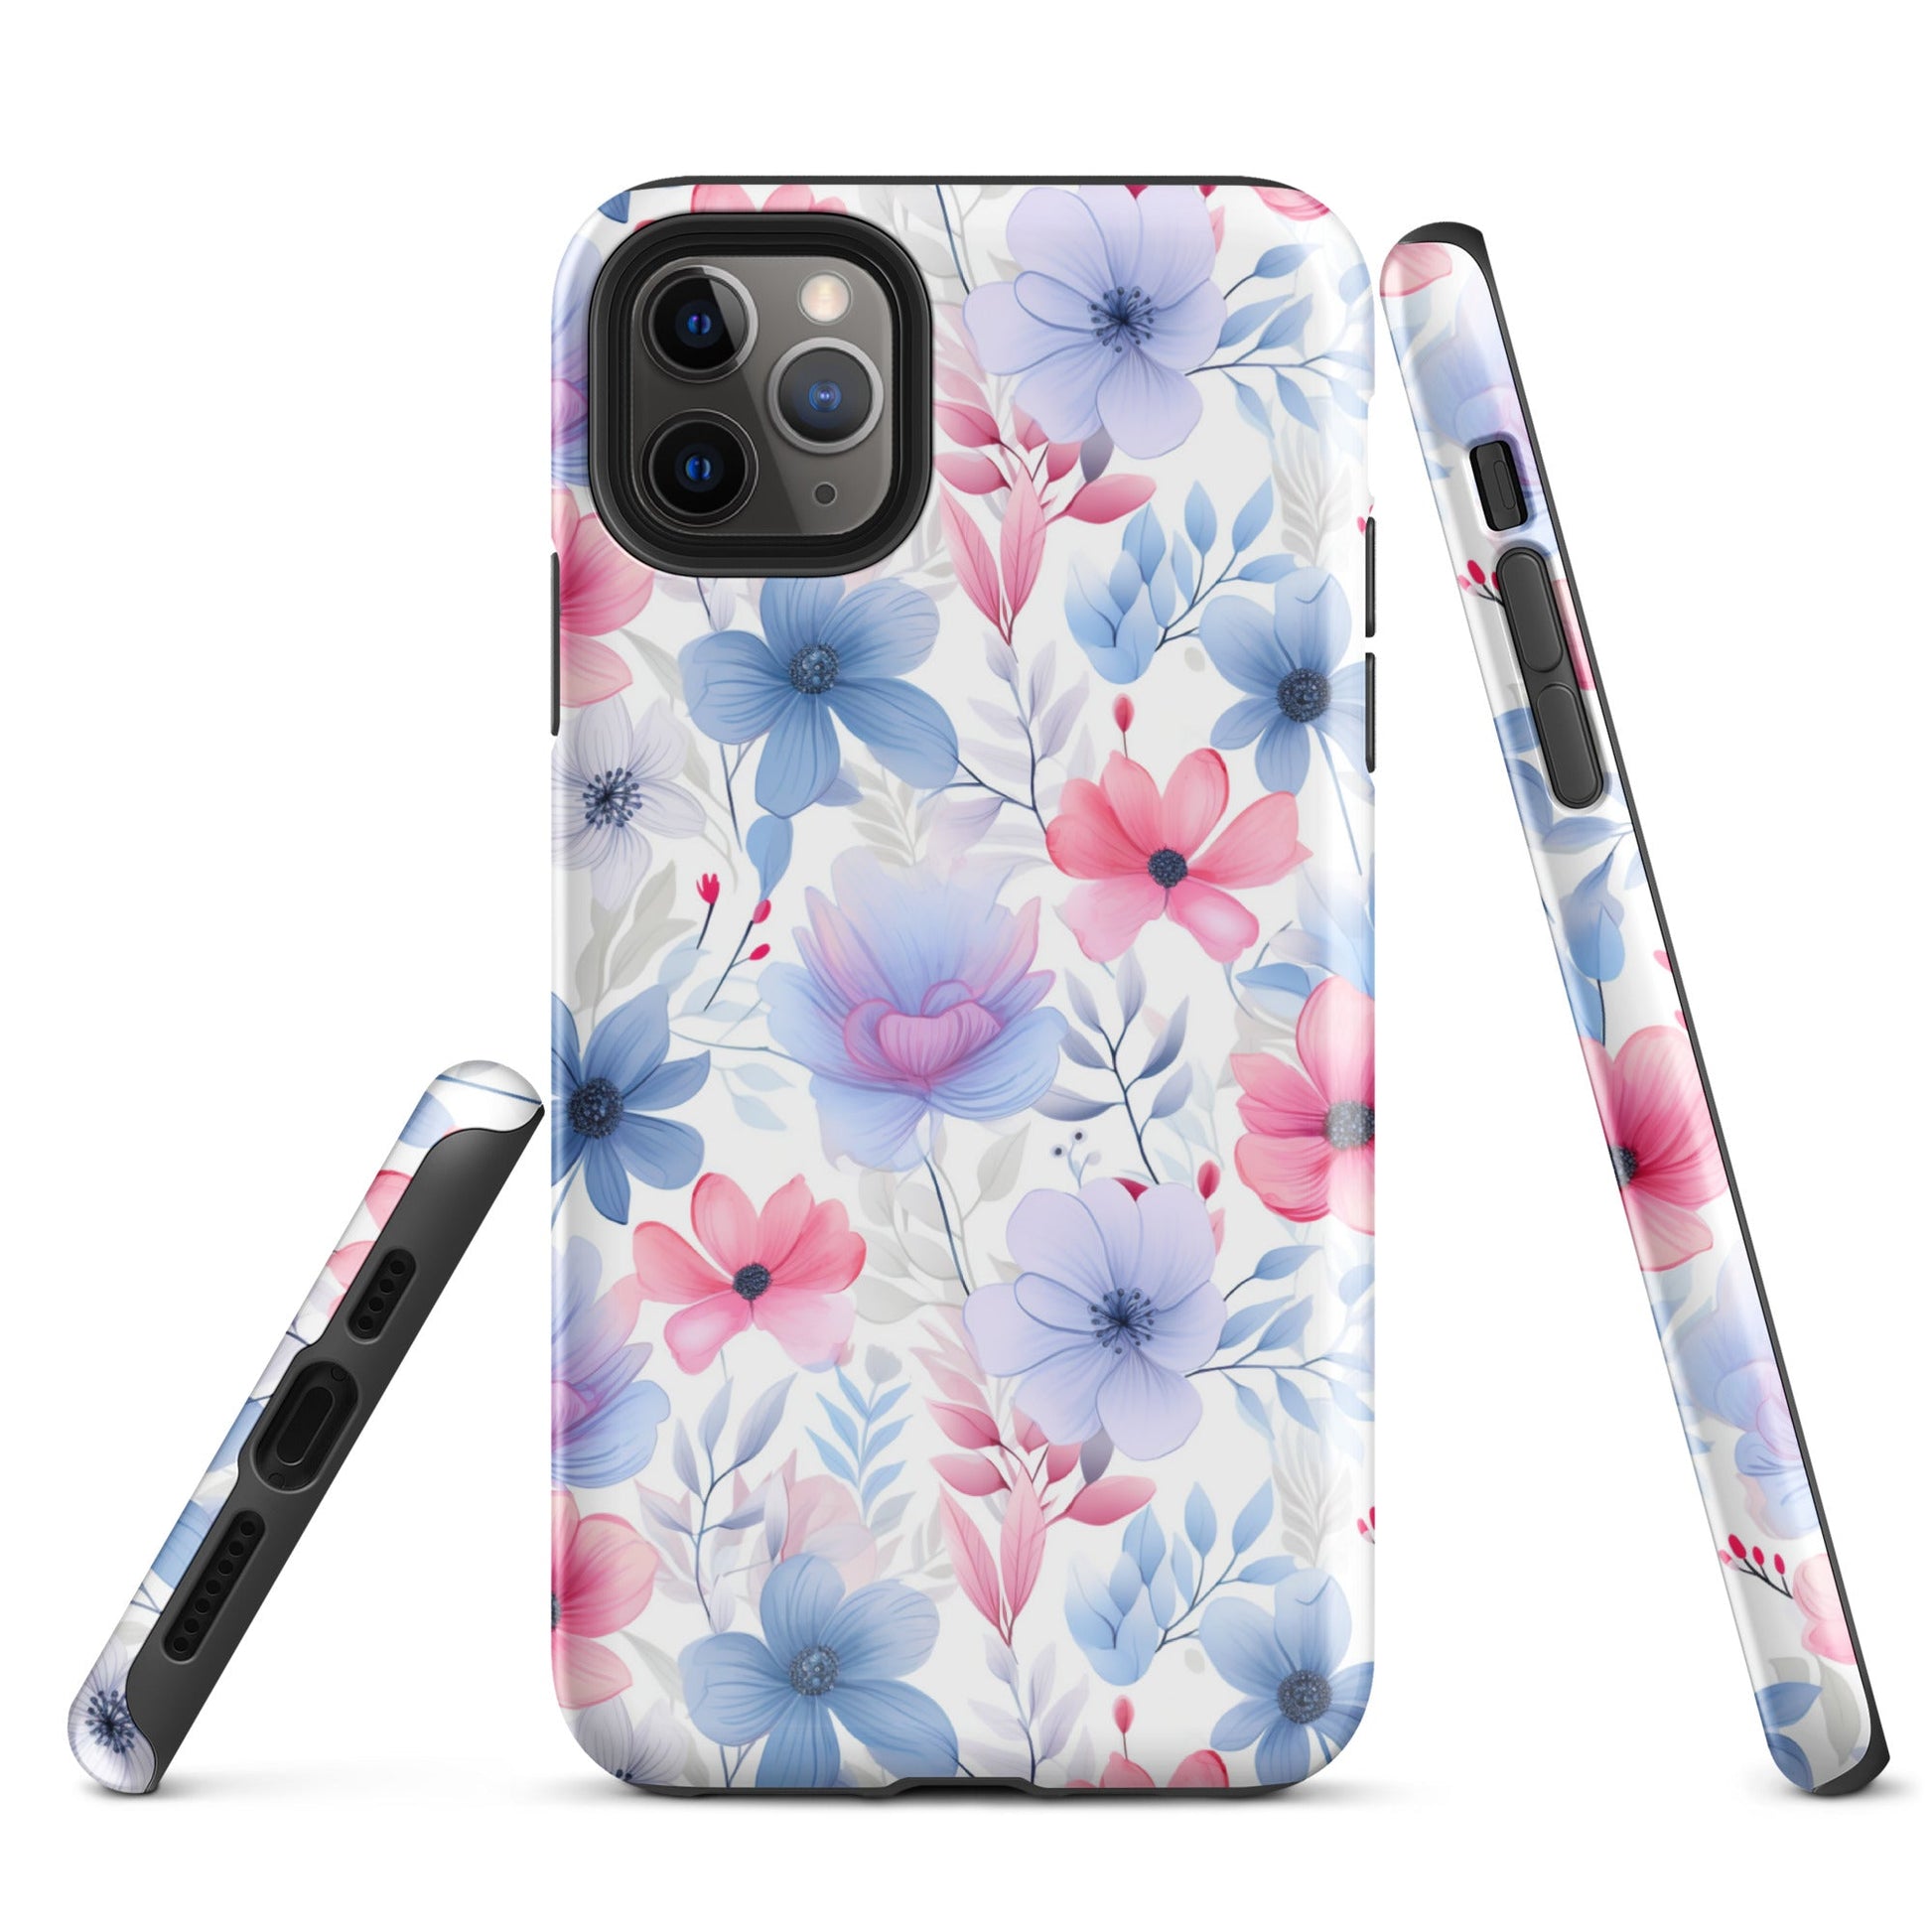 Floral Whispers - Subtle Shades - iPhone Case - Pattern Symphony